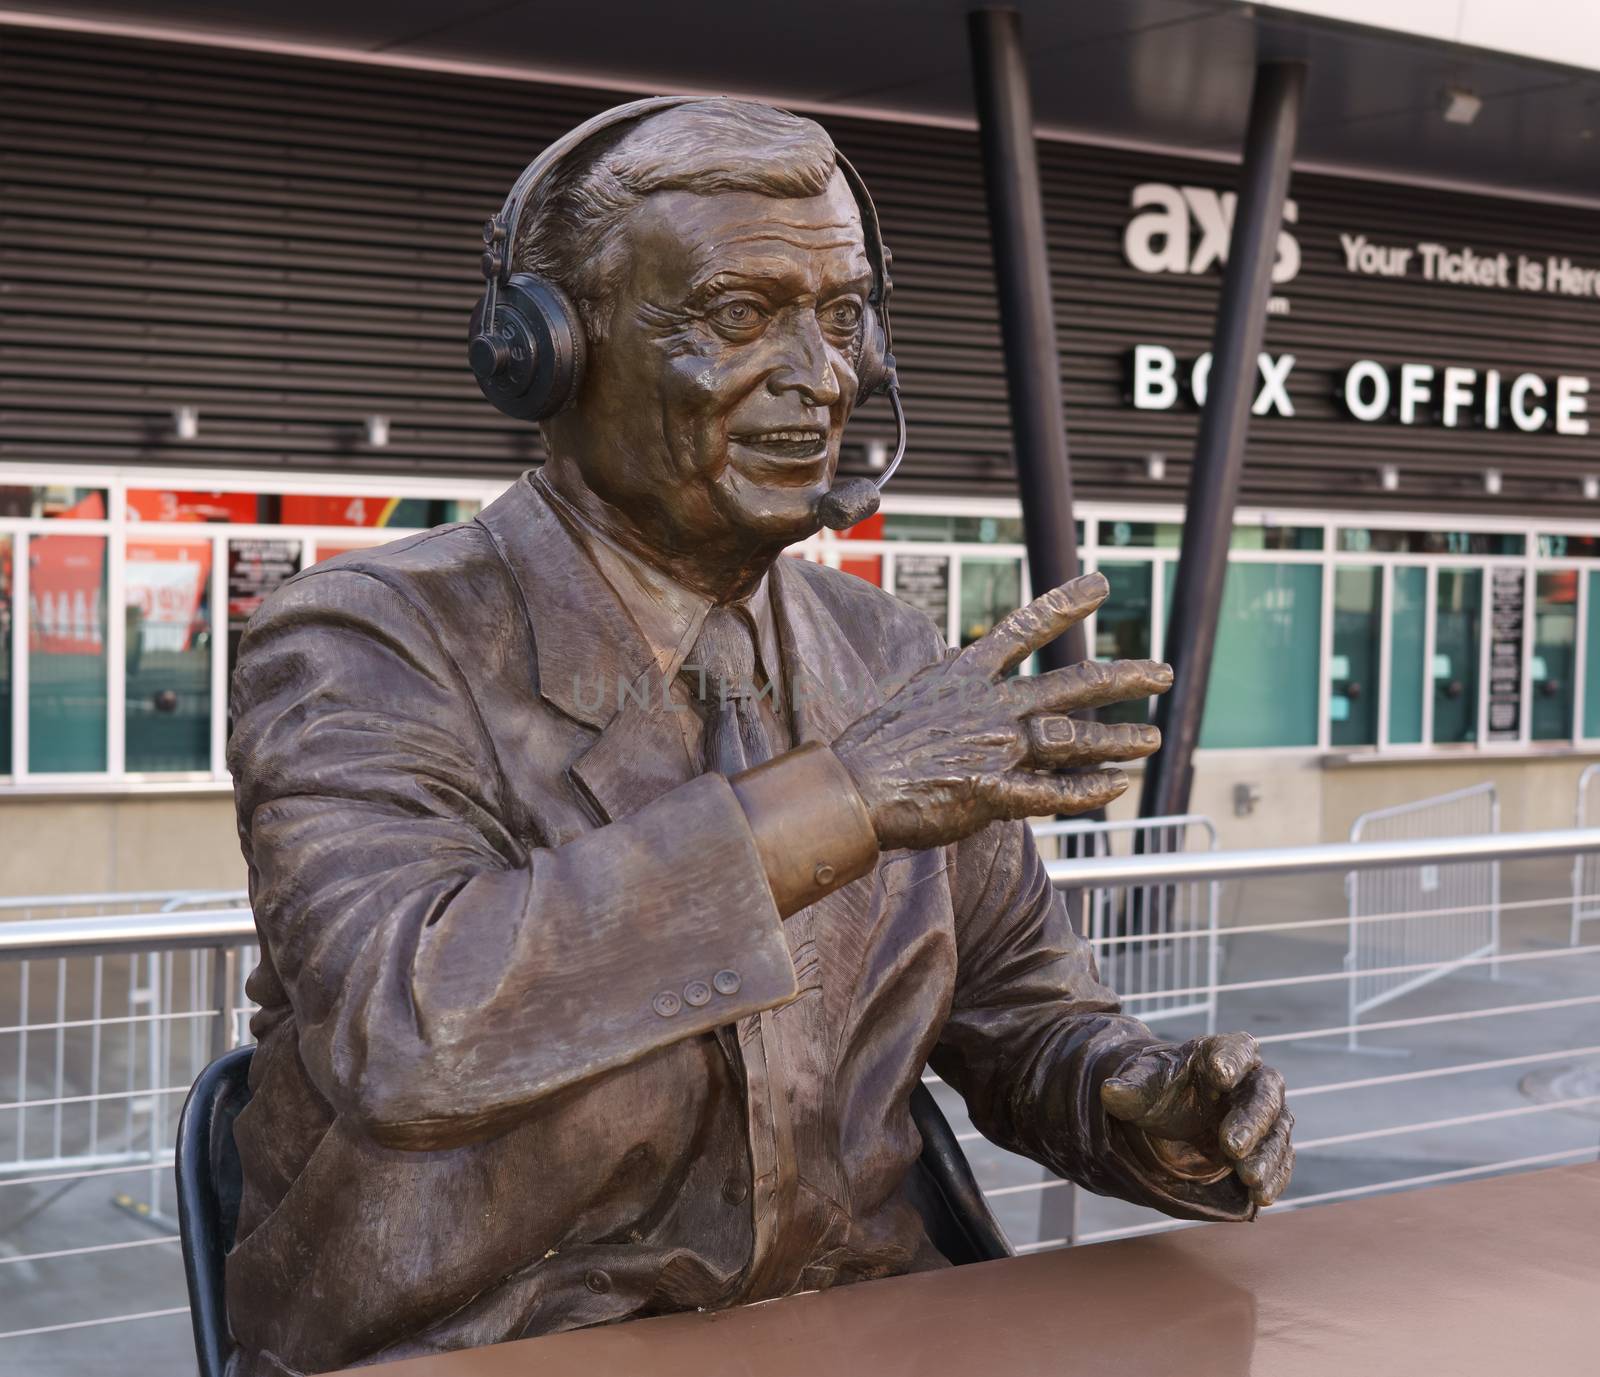 Chick Hearn Statue as Staples Center by wolterk